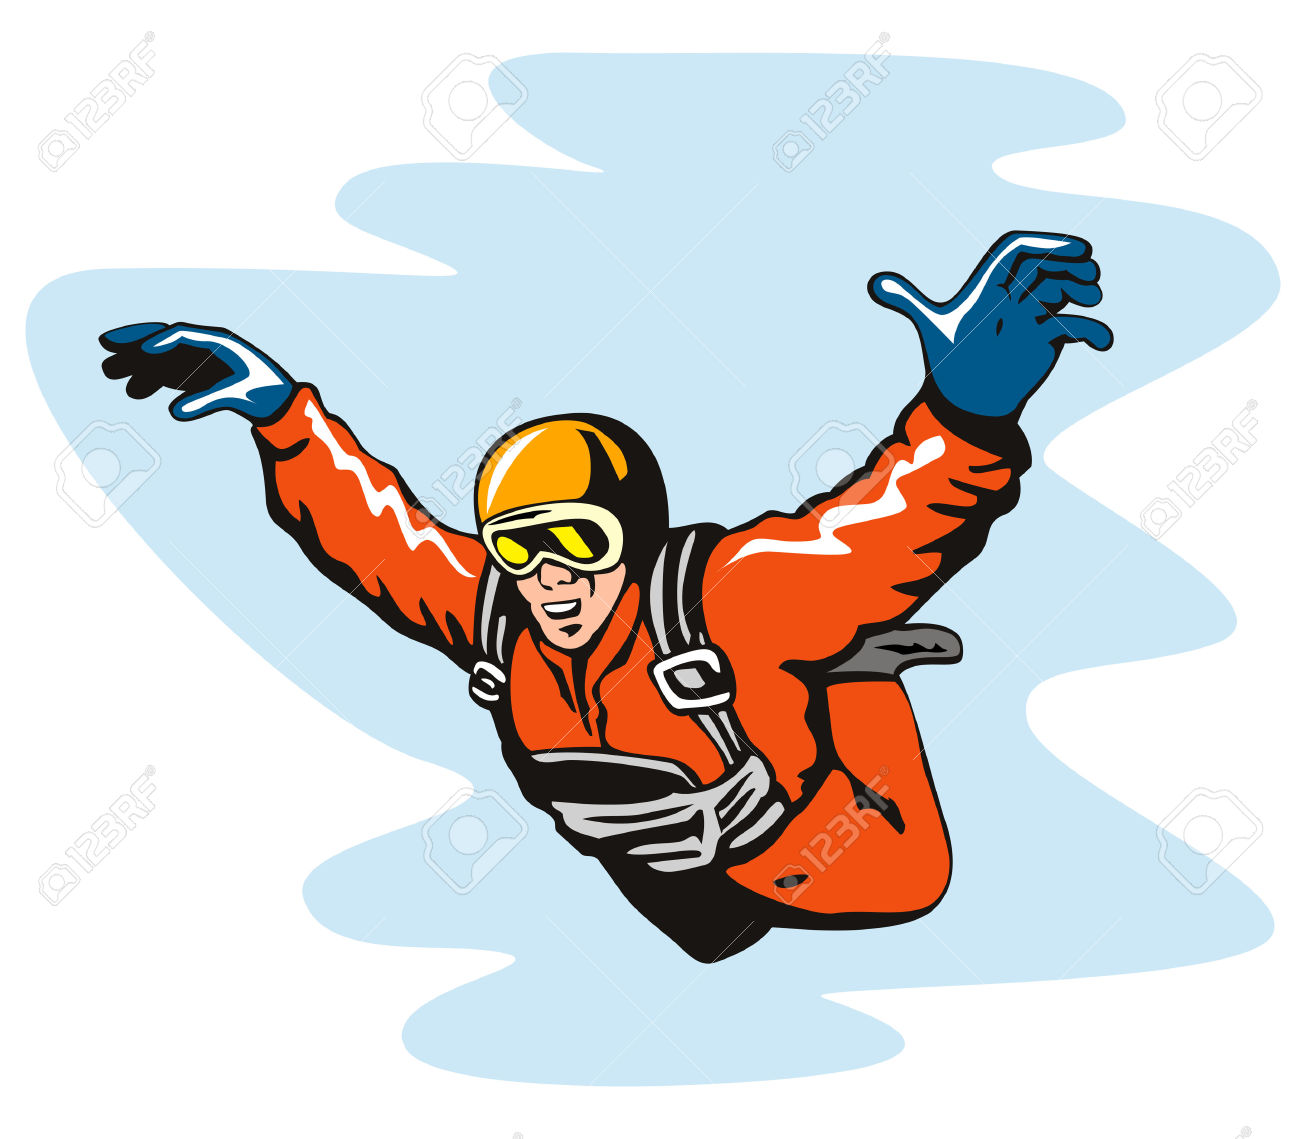 Skydiver Royalty Free Cliparts, Vectors, And Stock Illustration.